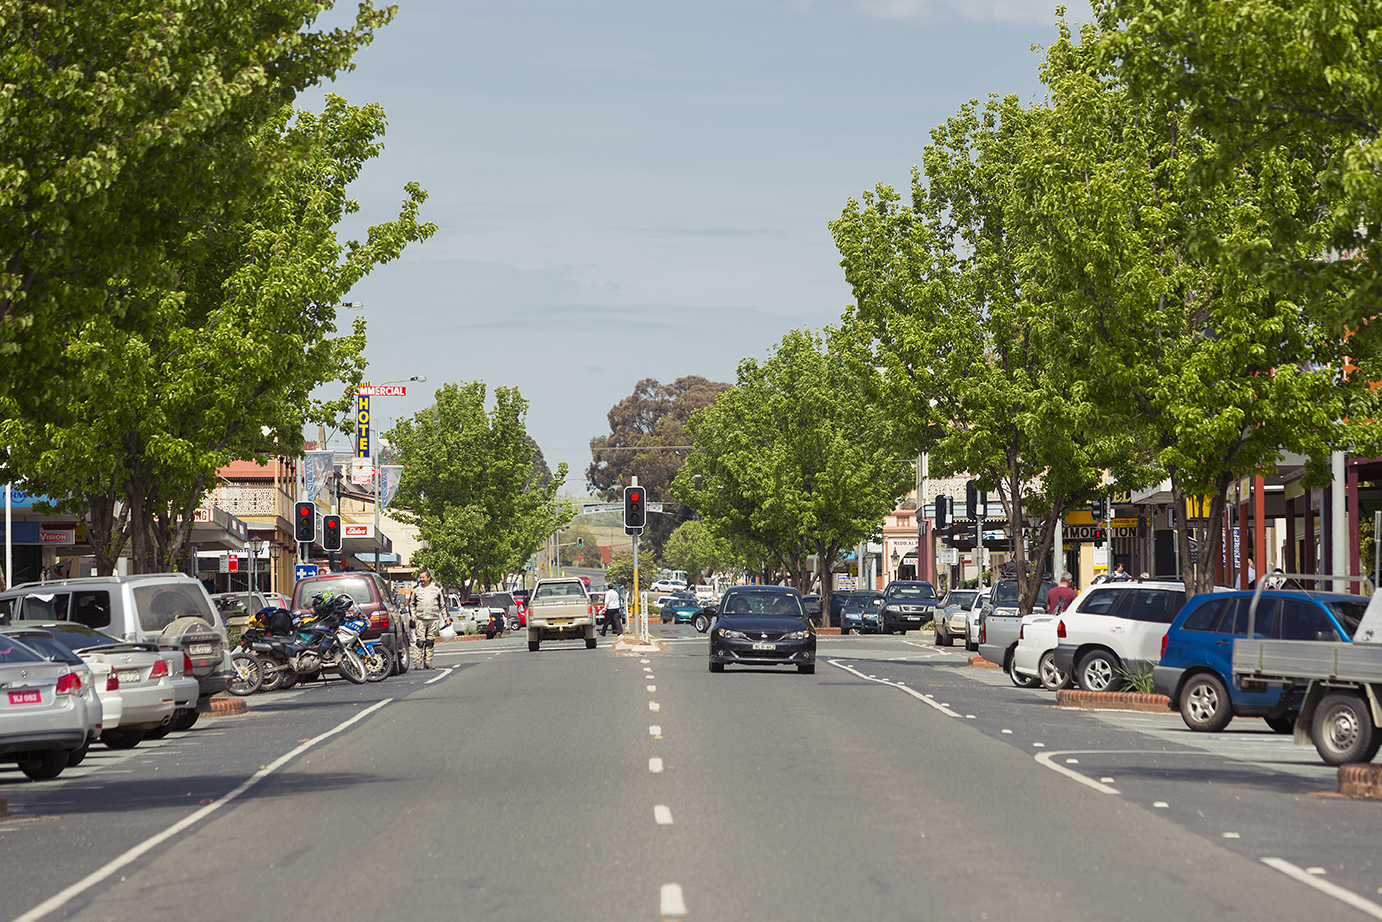 Yass residents invited to have their say on town's future